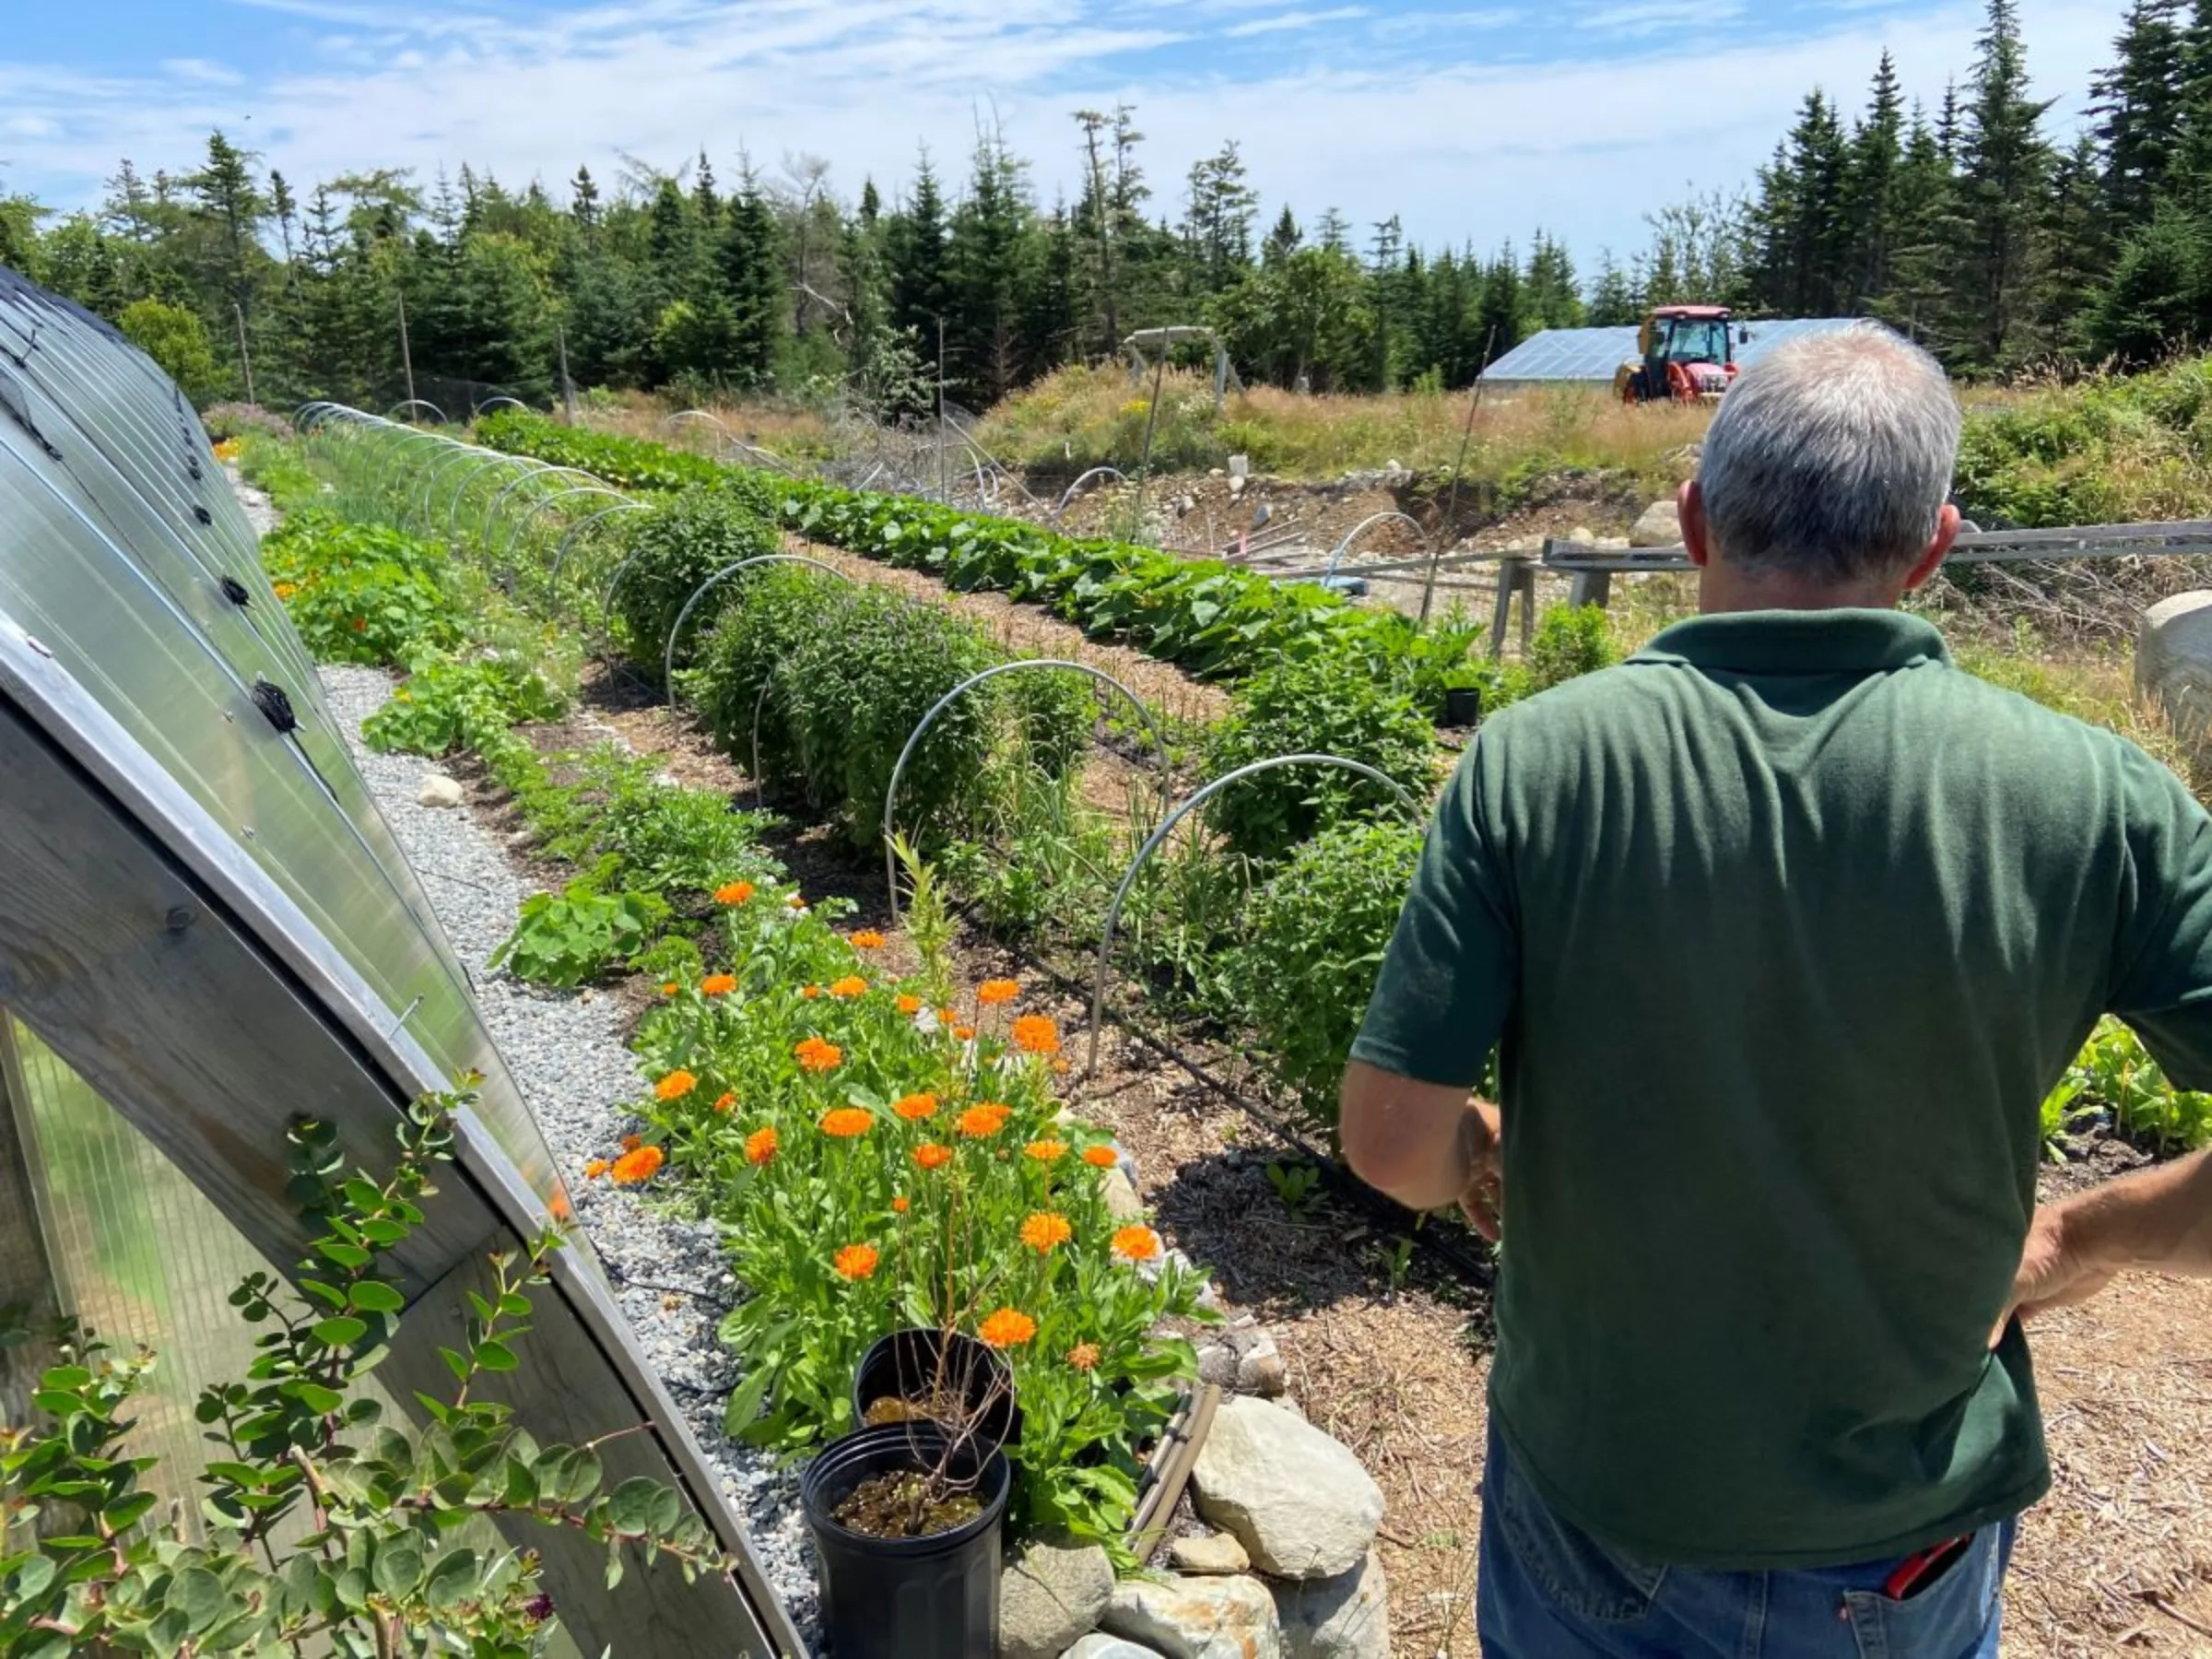 Matthew Roy, owner of Coastal Grove Farm, is pictured near a greenhouse at the farm in Nova Scotia, Canada, July 24, 2023